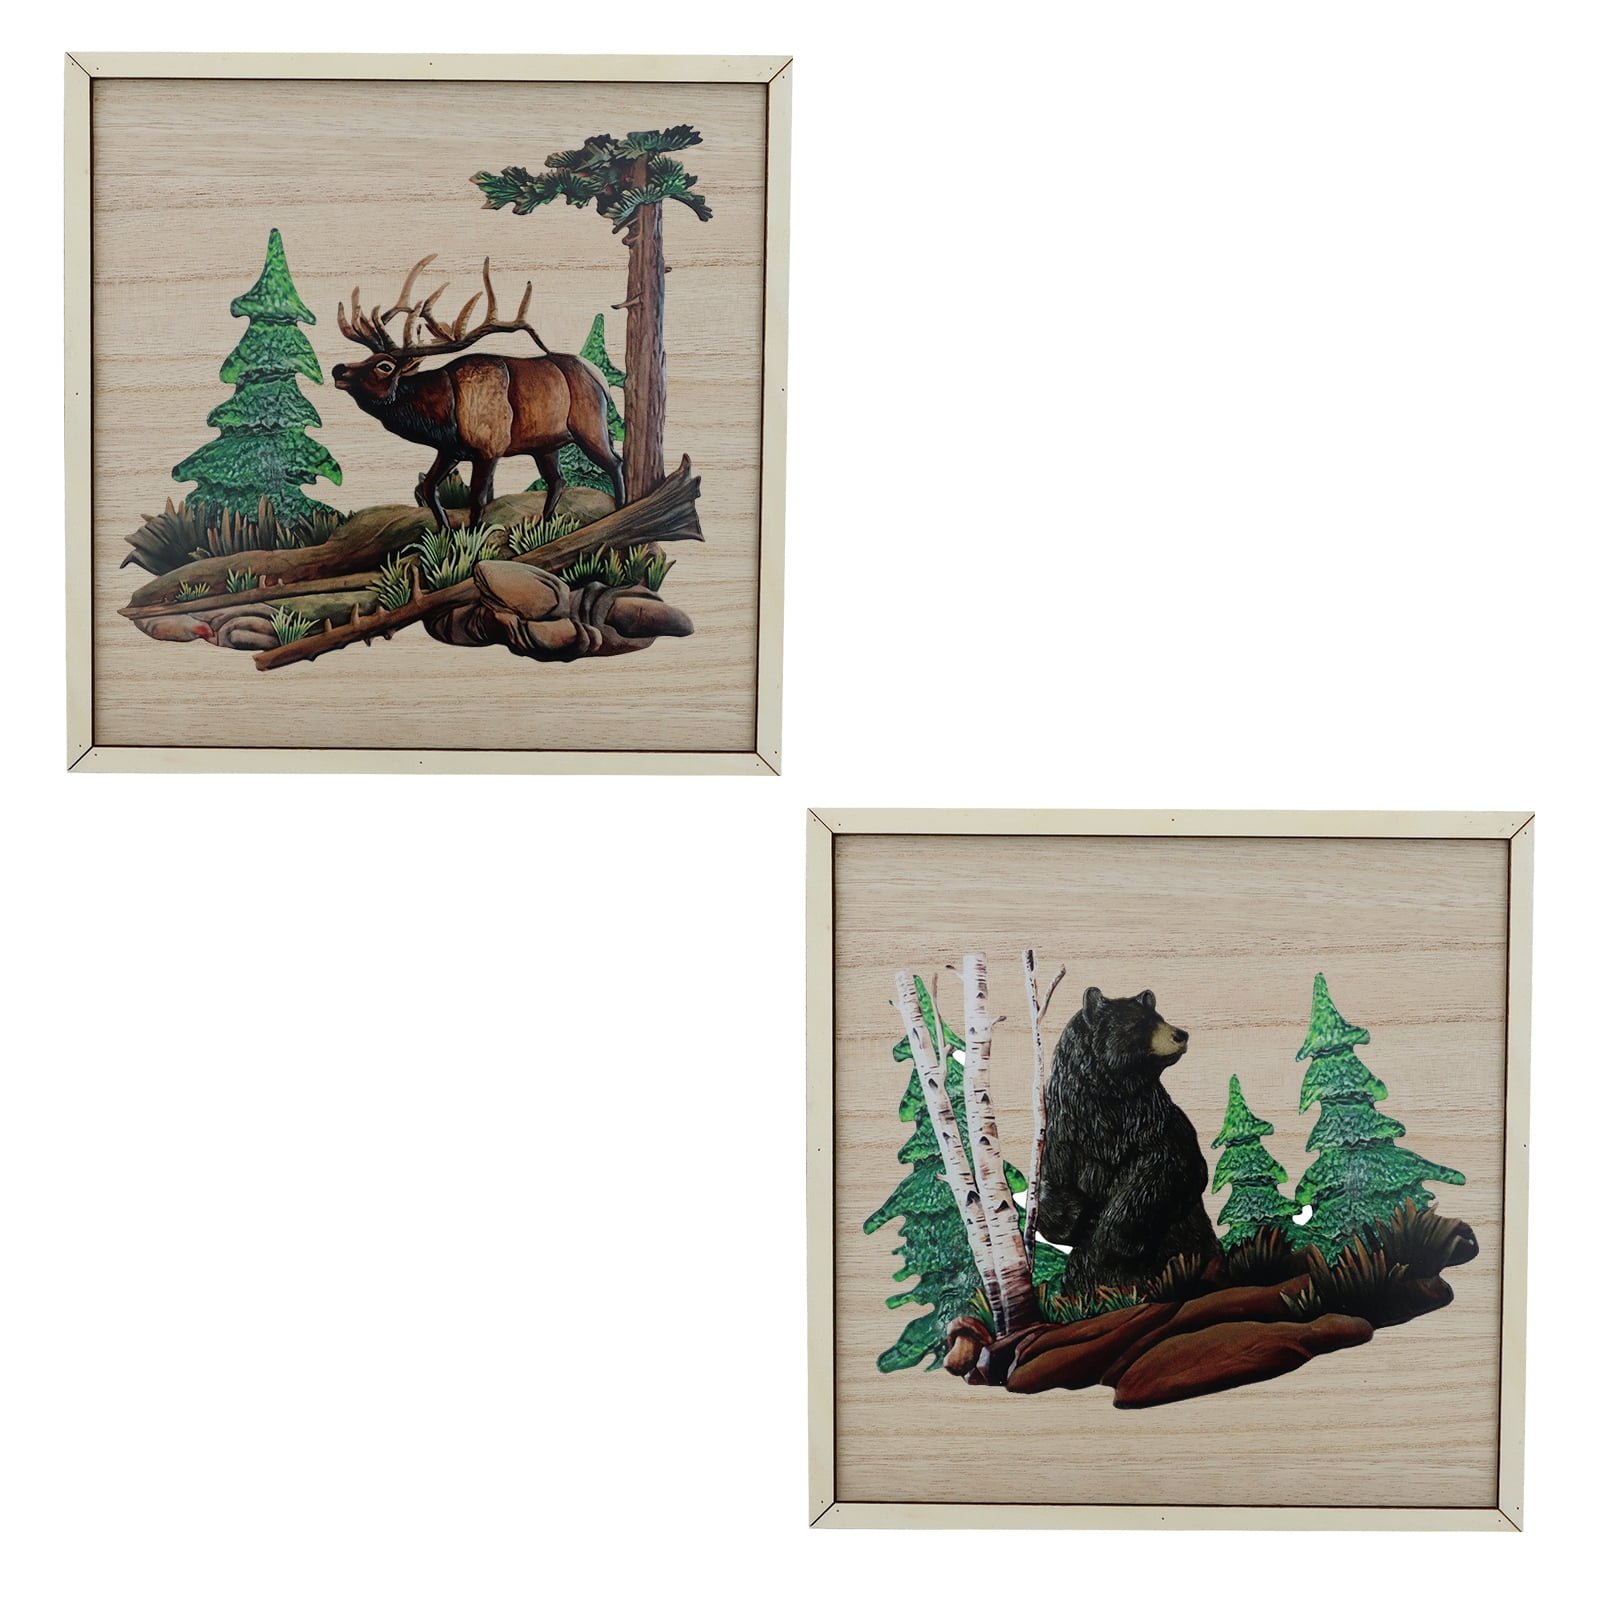 BVLFOOK DIY Wood and Metal Cabin wall Art Decor with Bear and Moose -  Woodland Rustic Hanging Wall Decoration for Home, Log Cabin, Hunting  Mountain Lodge, Metal Wildlife Theme Decor Set of